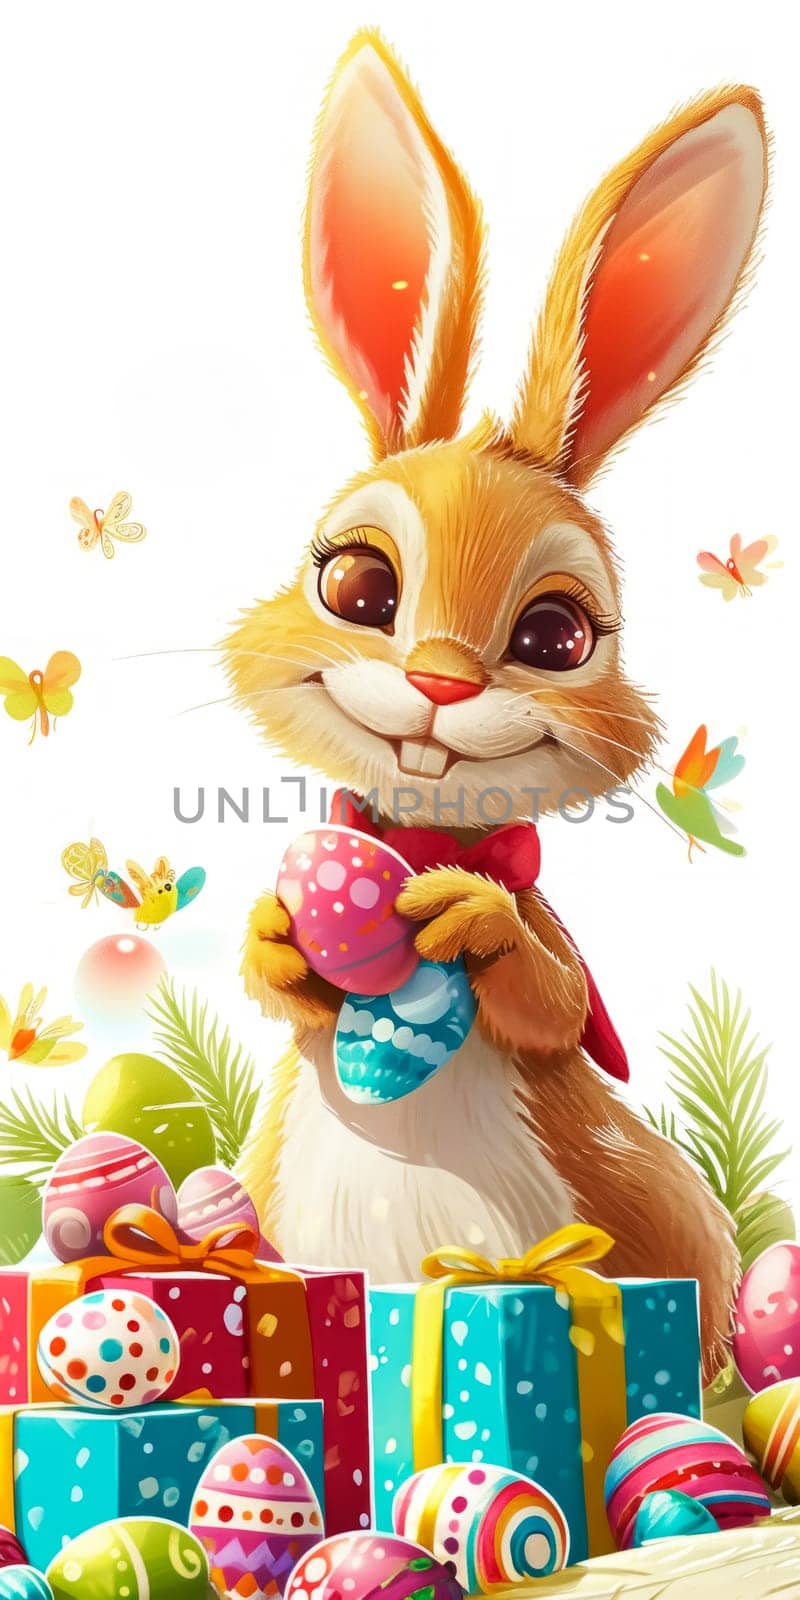 An endearing Easter bunny holding a decorated egg, surrounded by a festive array of colorful Easter eggs and gift boxes, with butterflies fluttering around.